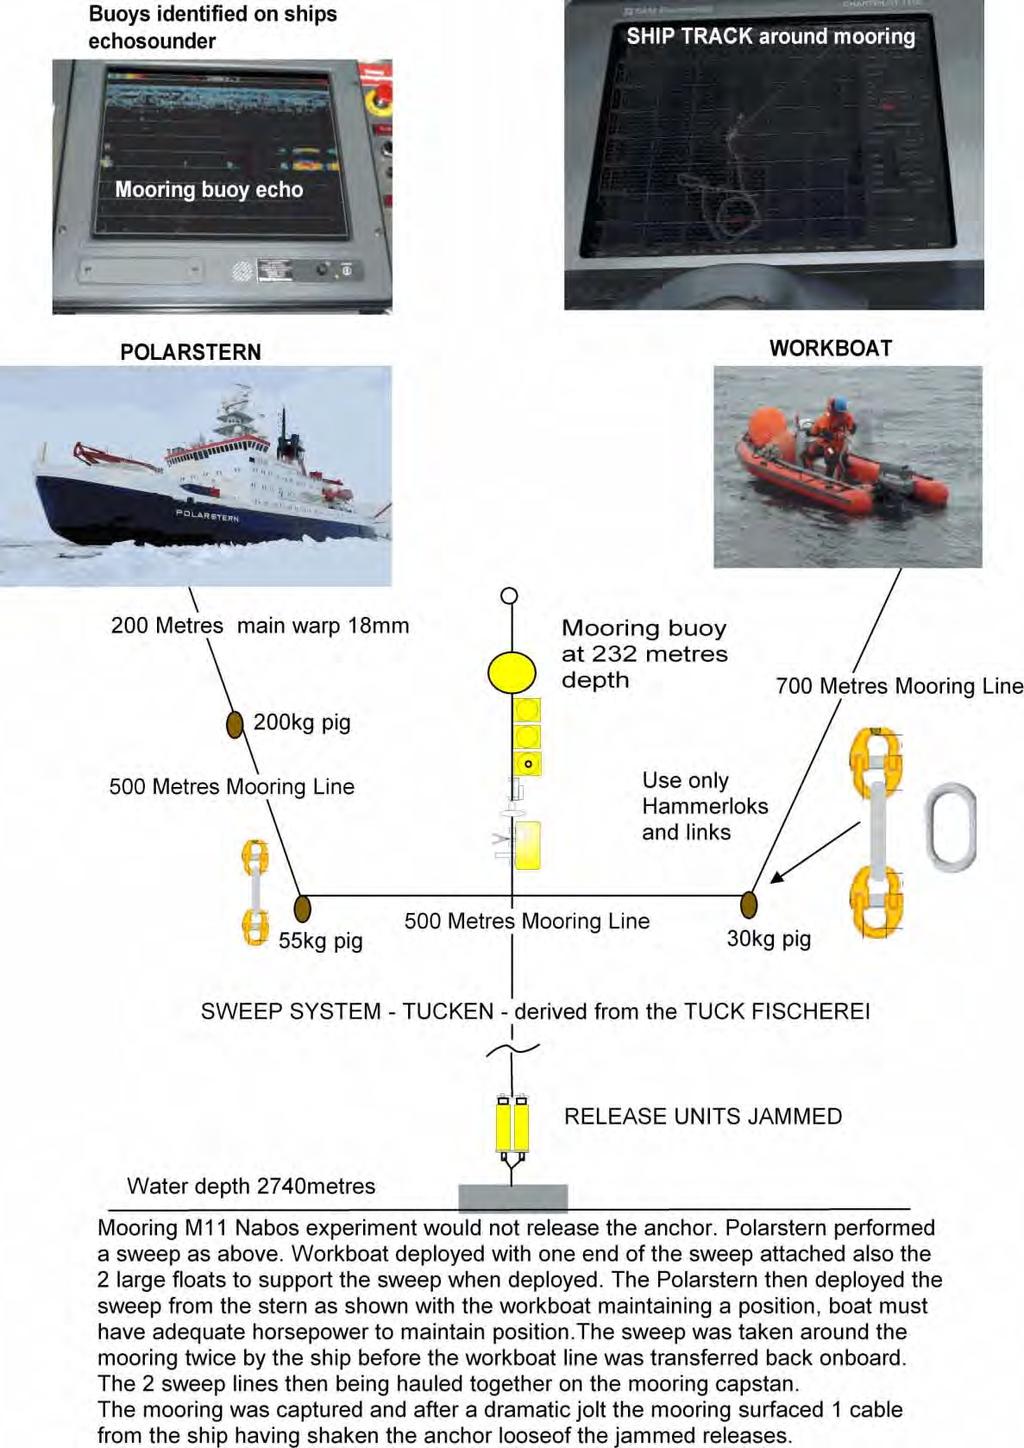 Figure II.3: R/V Polarstern sweep for NABOS M11a mooring. NABOS M11a mooring would not release the anchor. R/V Polarstern performed a sweep as shown in Figure II.3. Workboat deployed with one end of the sweep attached also the two large floats to support the sweep when deployed.